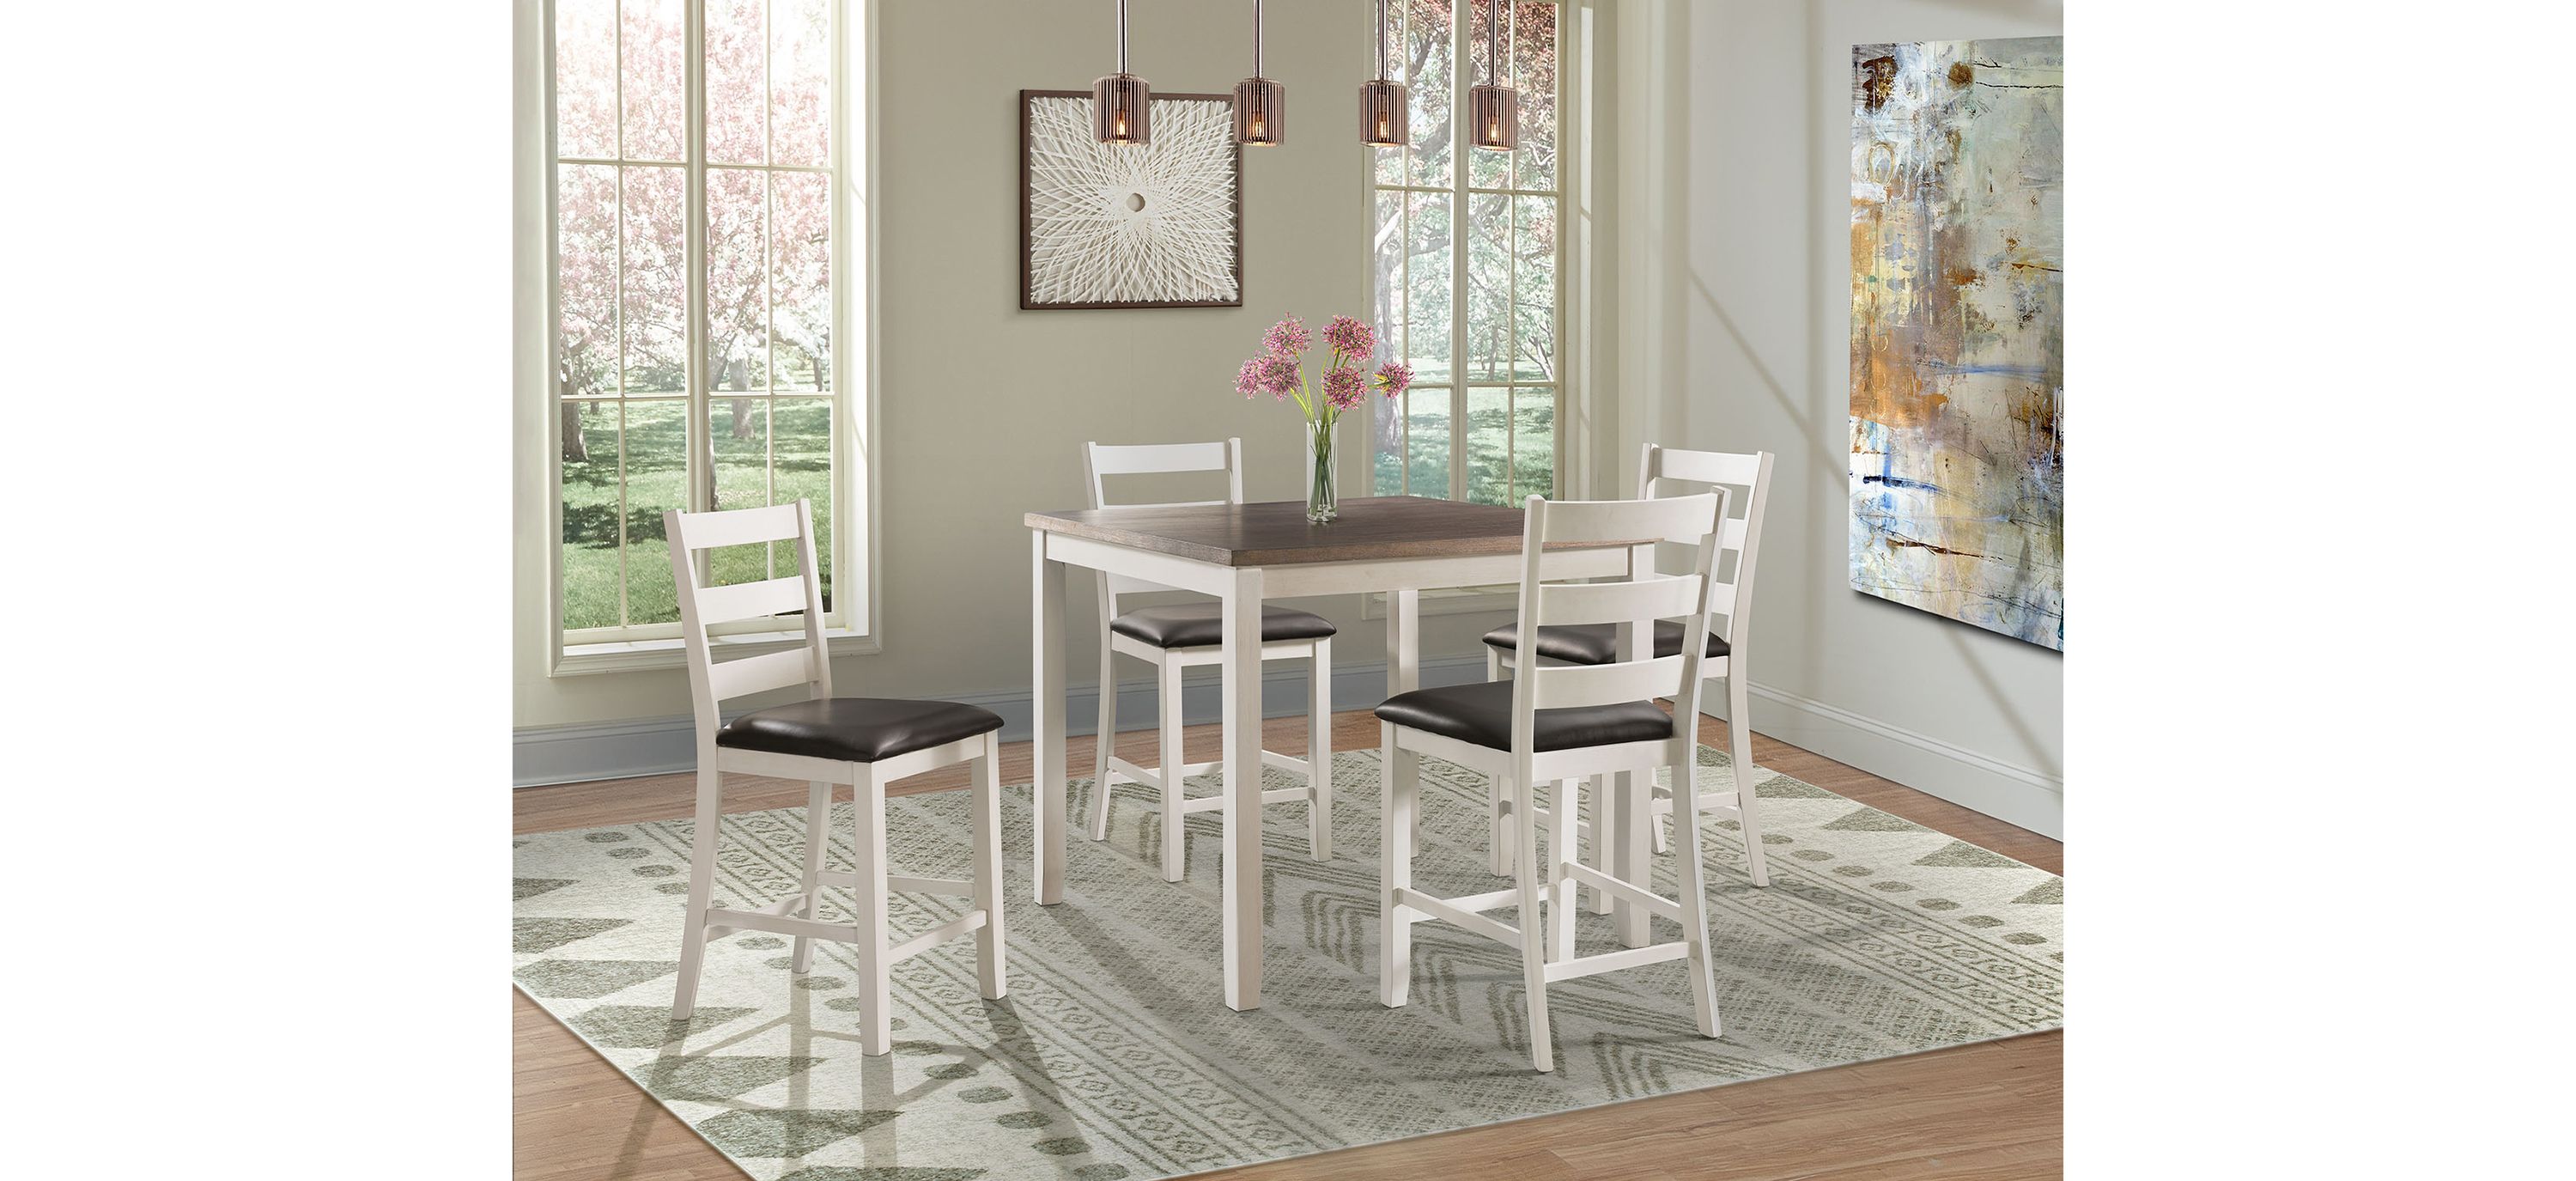 Glenwood 5-pc. Counter-Height Dining Set